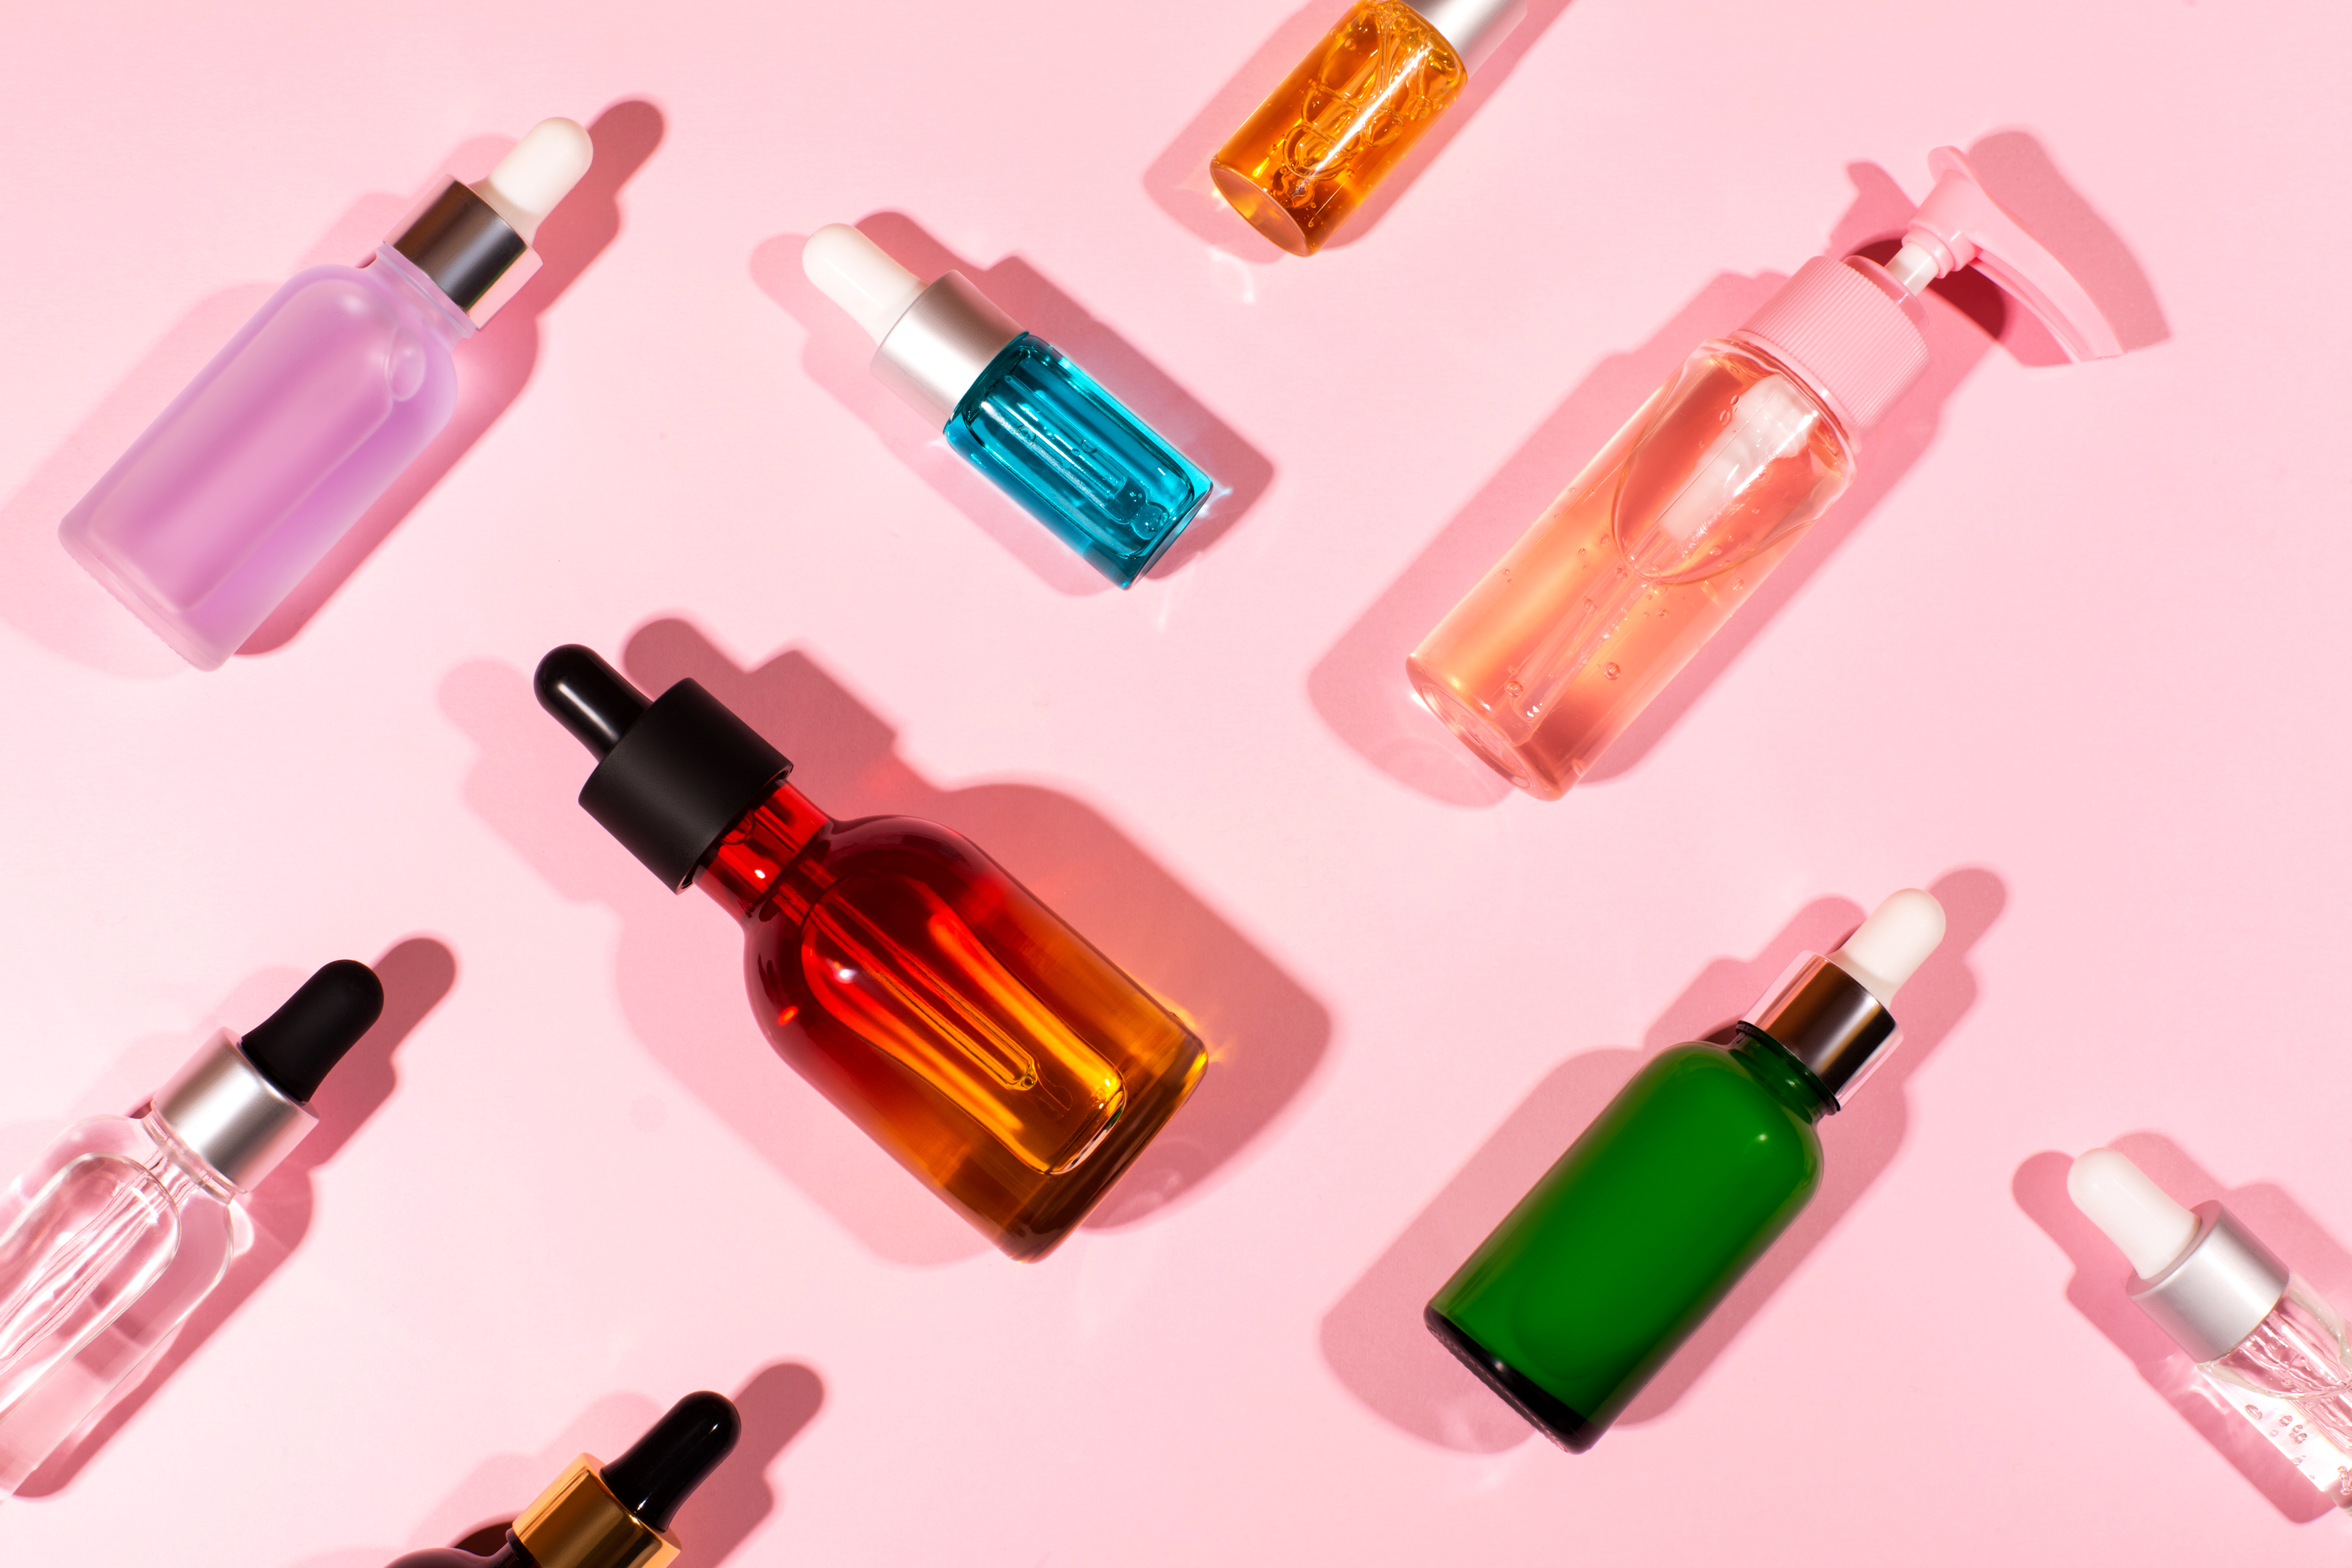 Colorful cosmetics bottles arranged on their sides in a diagonal grid.